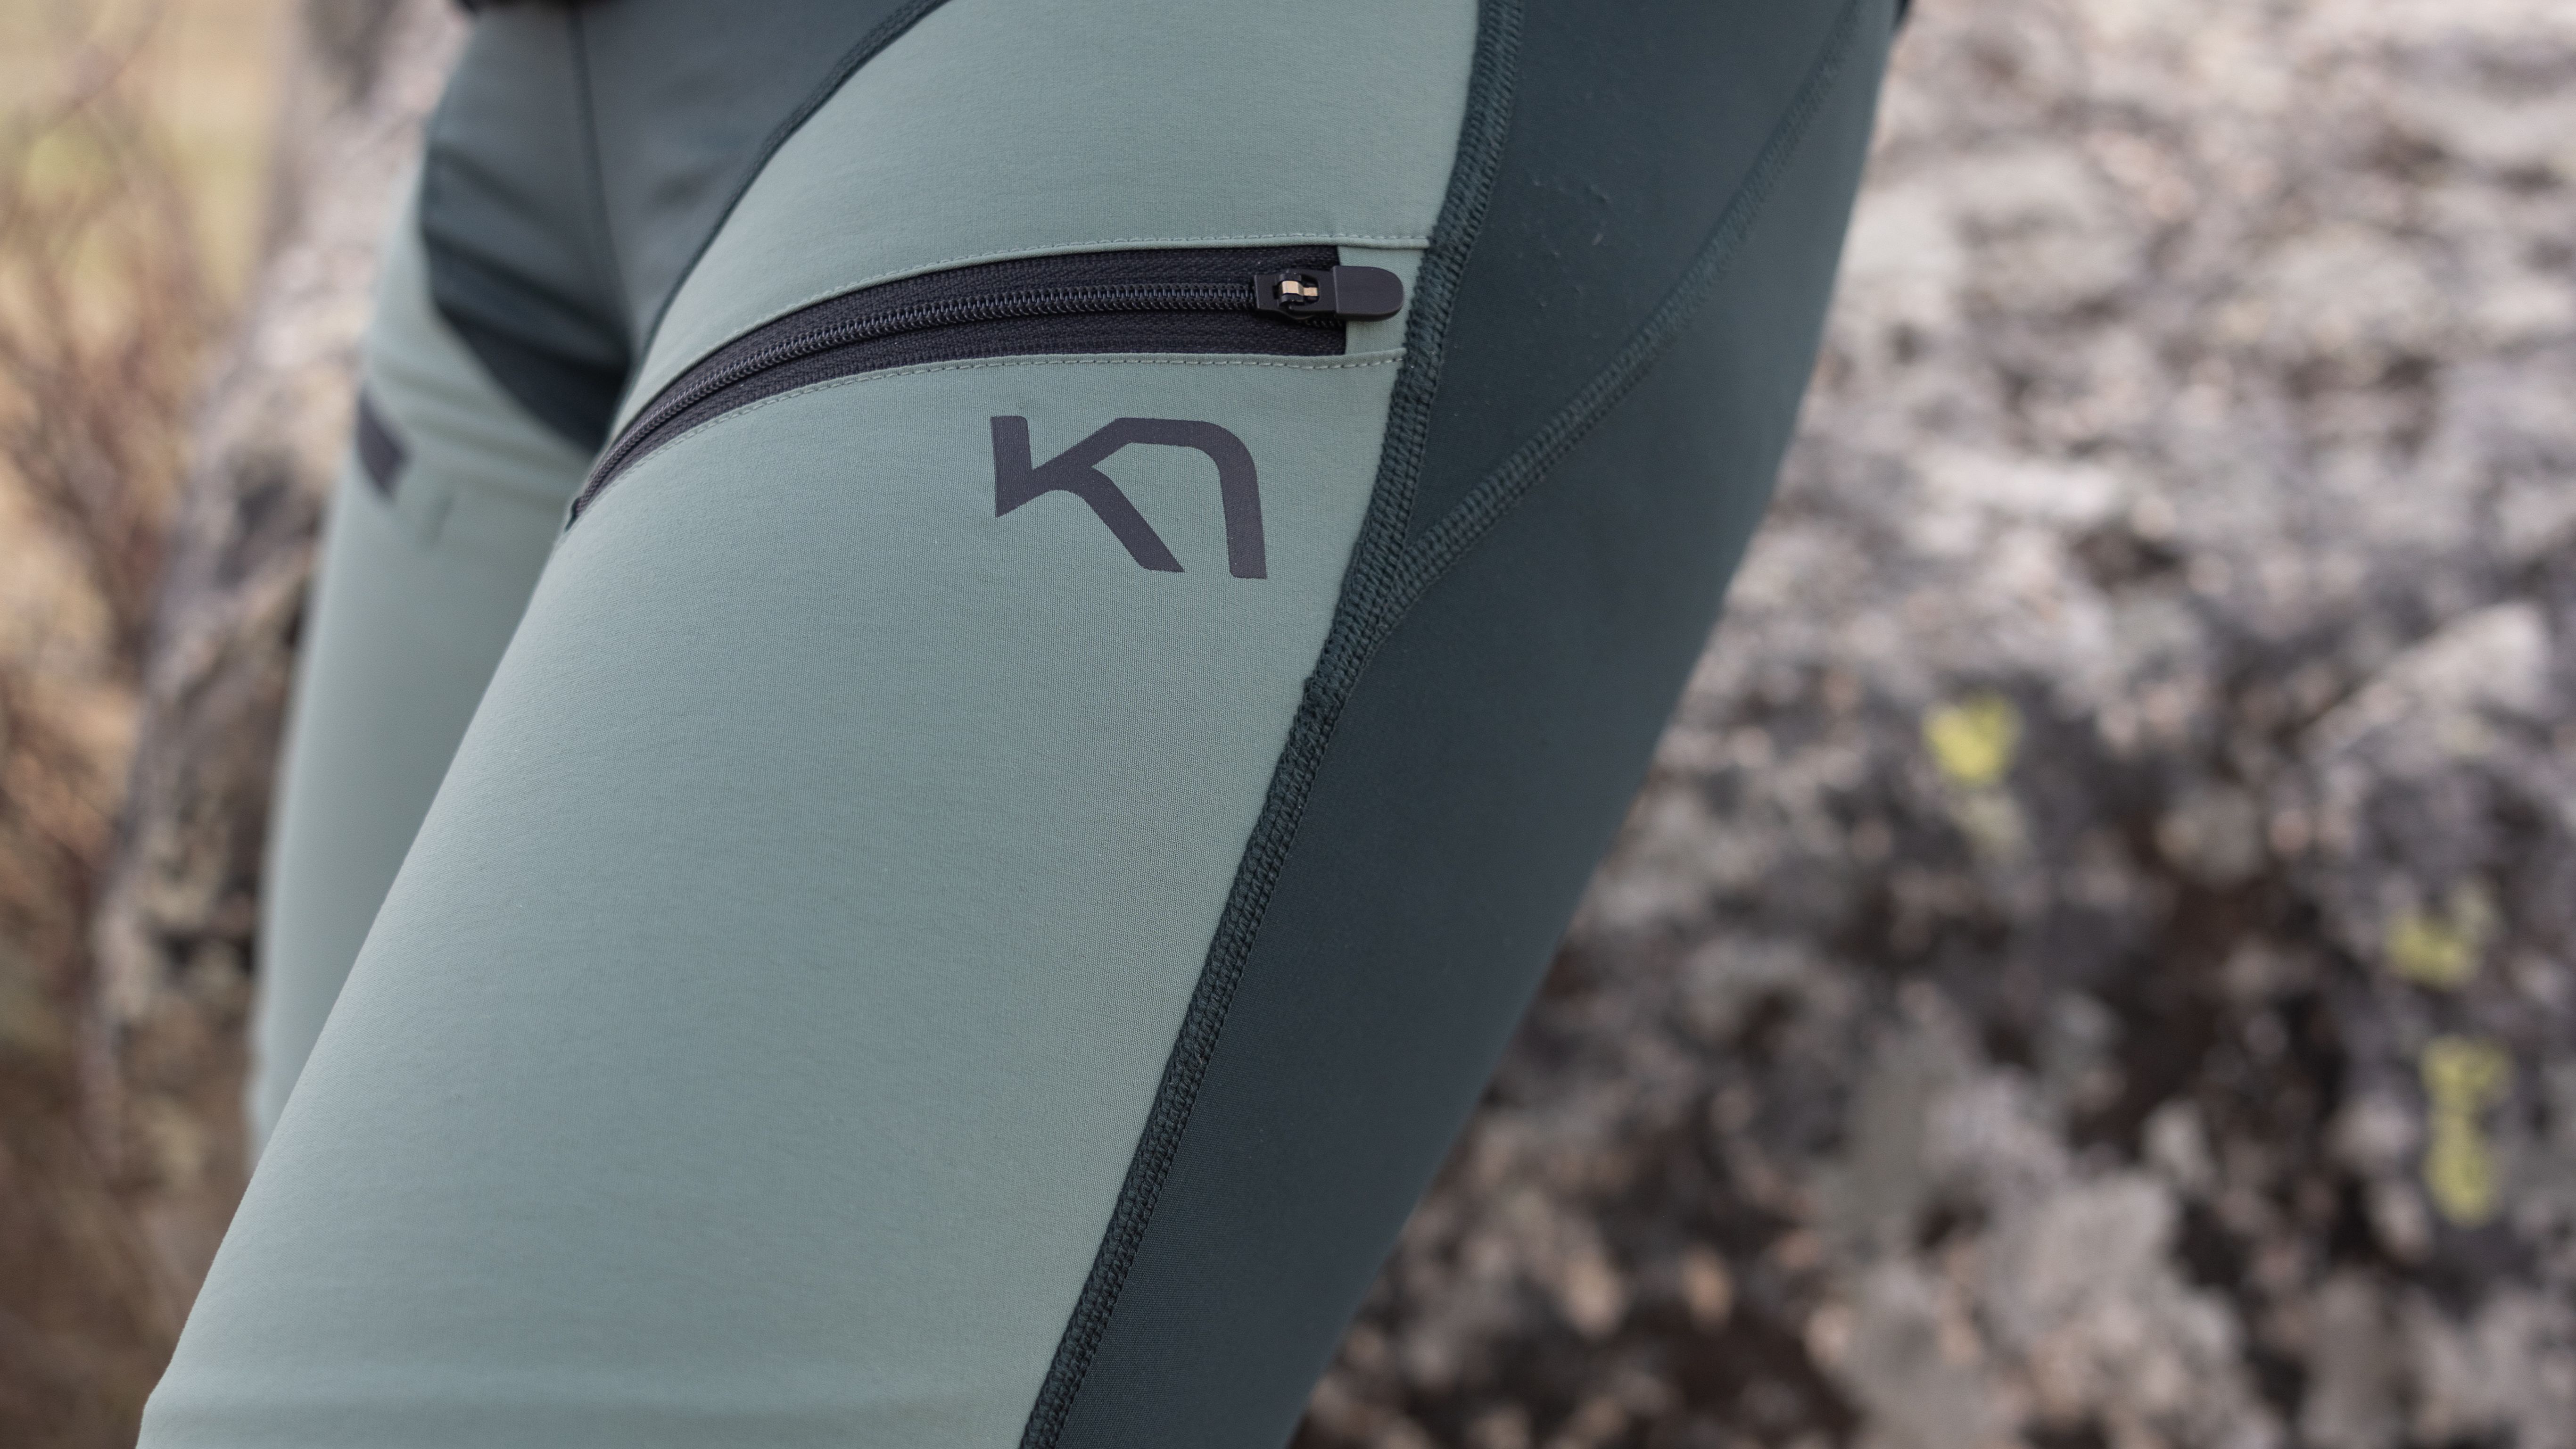 12 Top-Rated Leggings for Hiking: Expert Review - Paula Pins The Planet